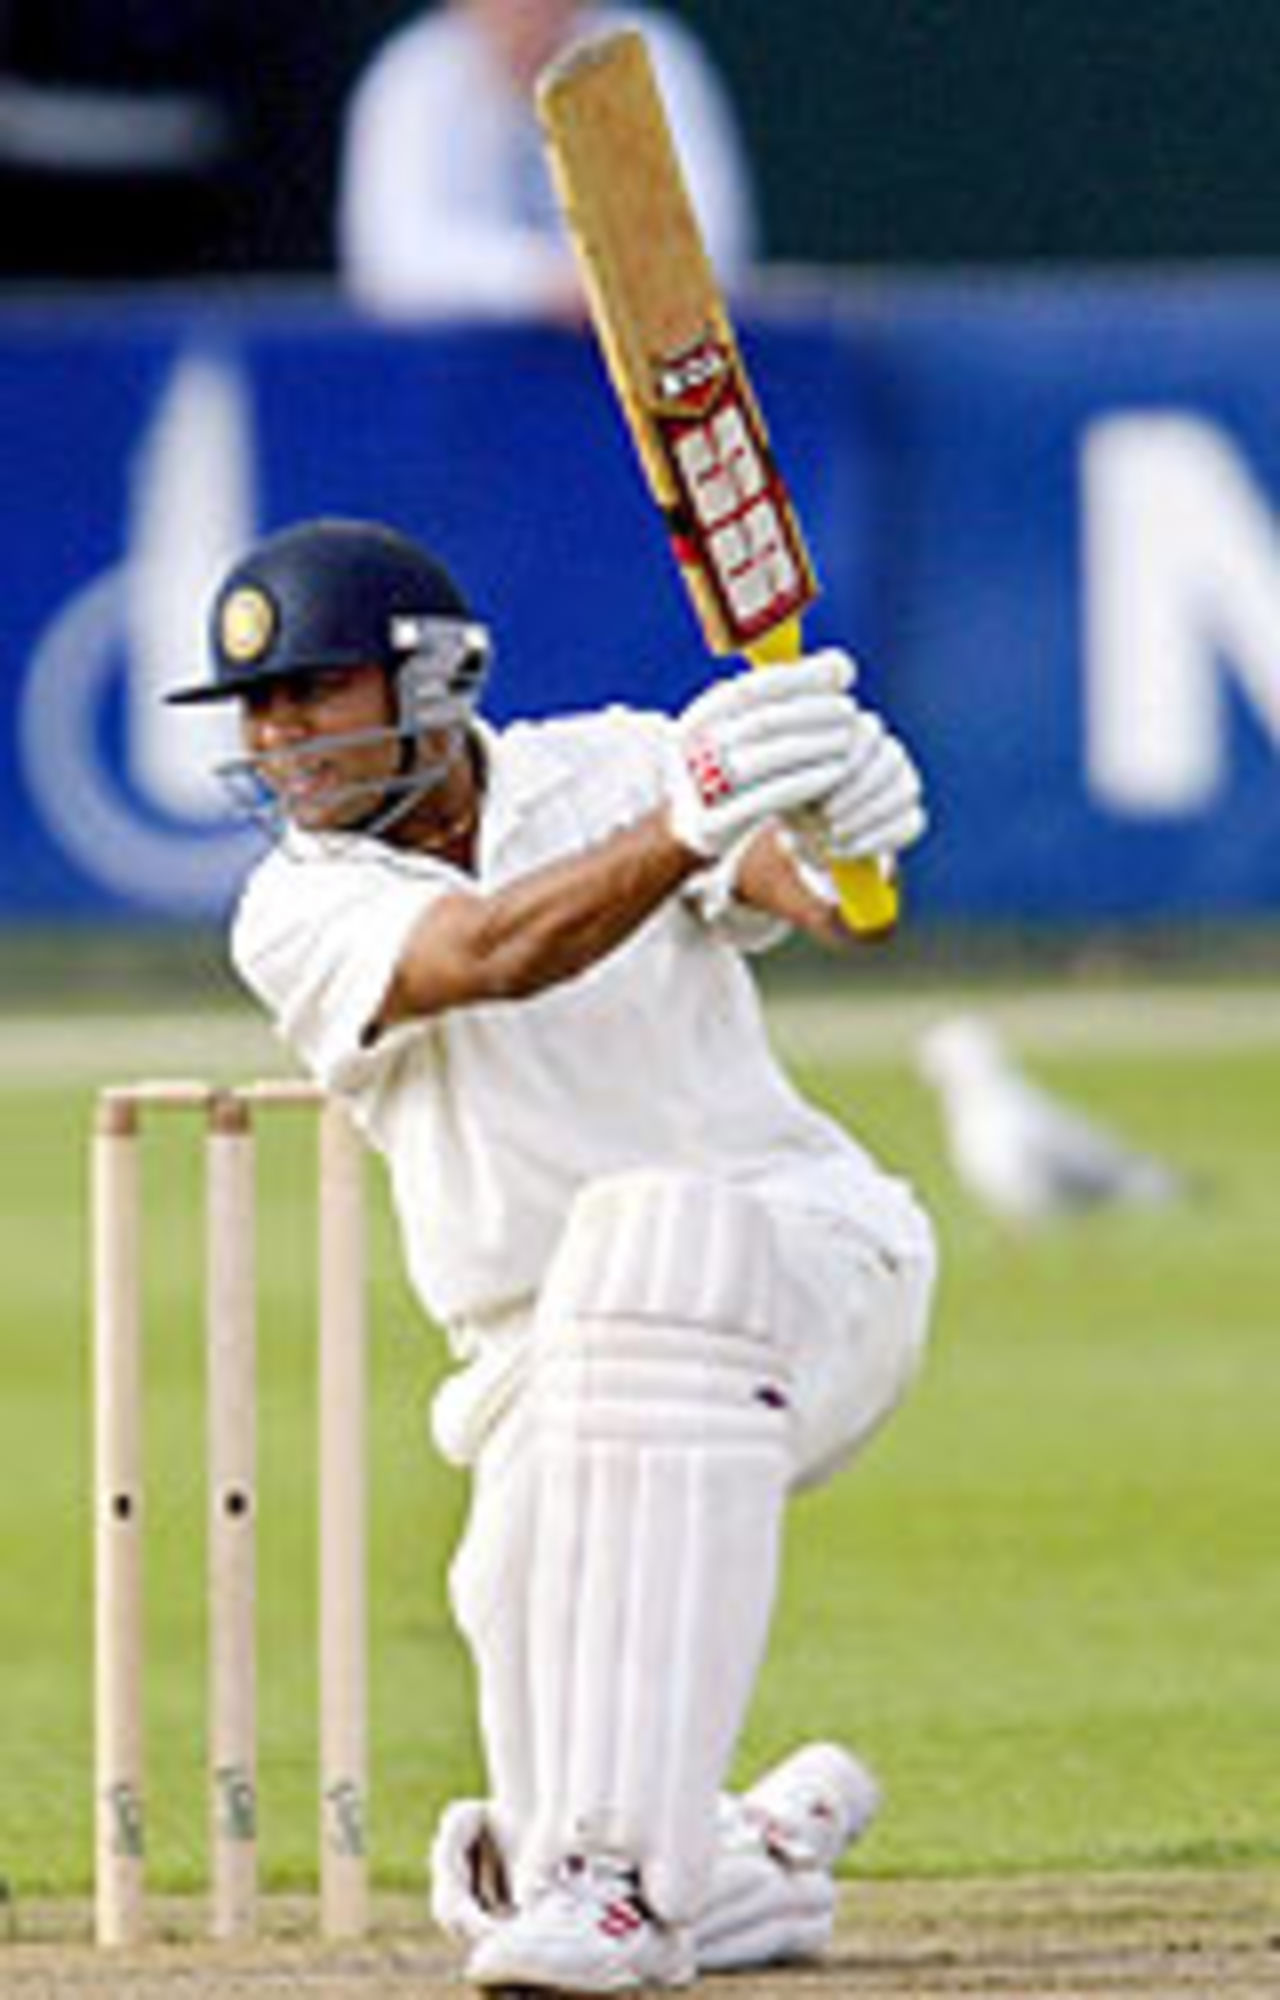 Akash Chopra launches into a classical cover-drive, Australia A v Indians, tour game, Hobard, 1st day, December 19, 2003